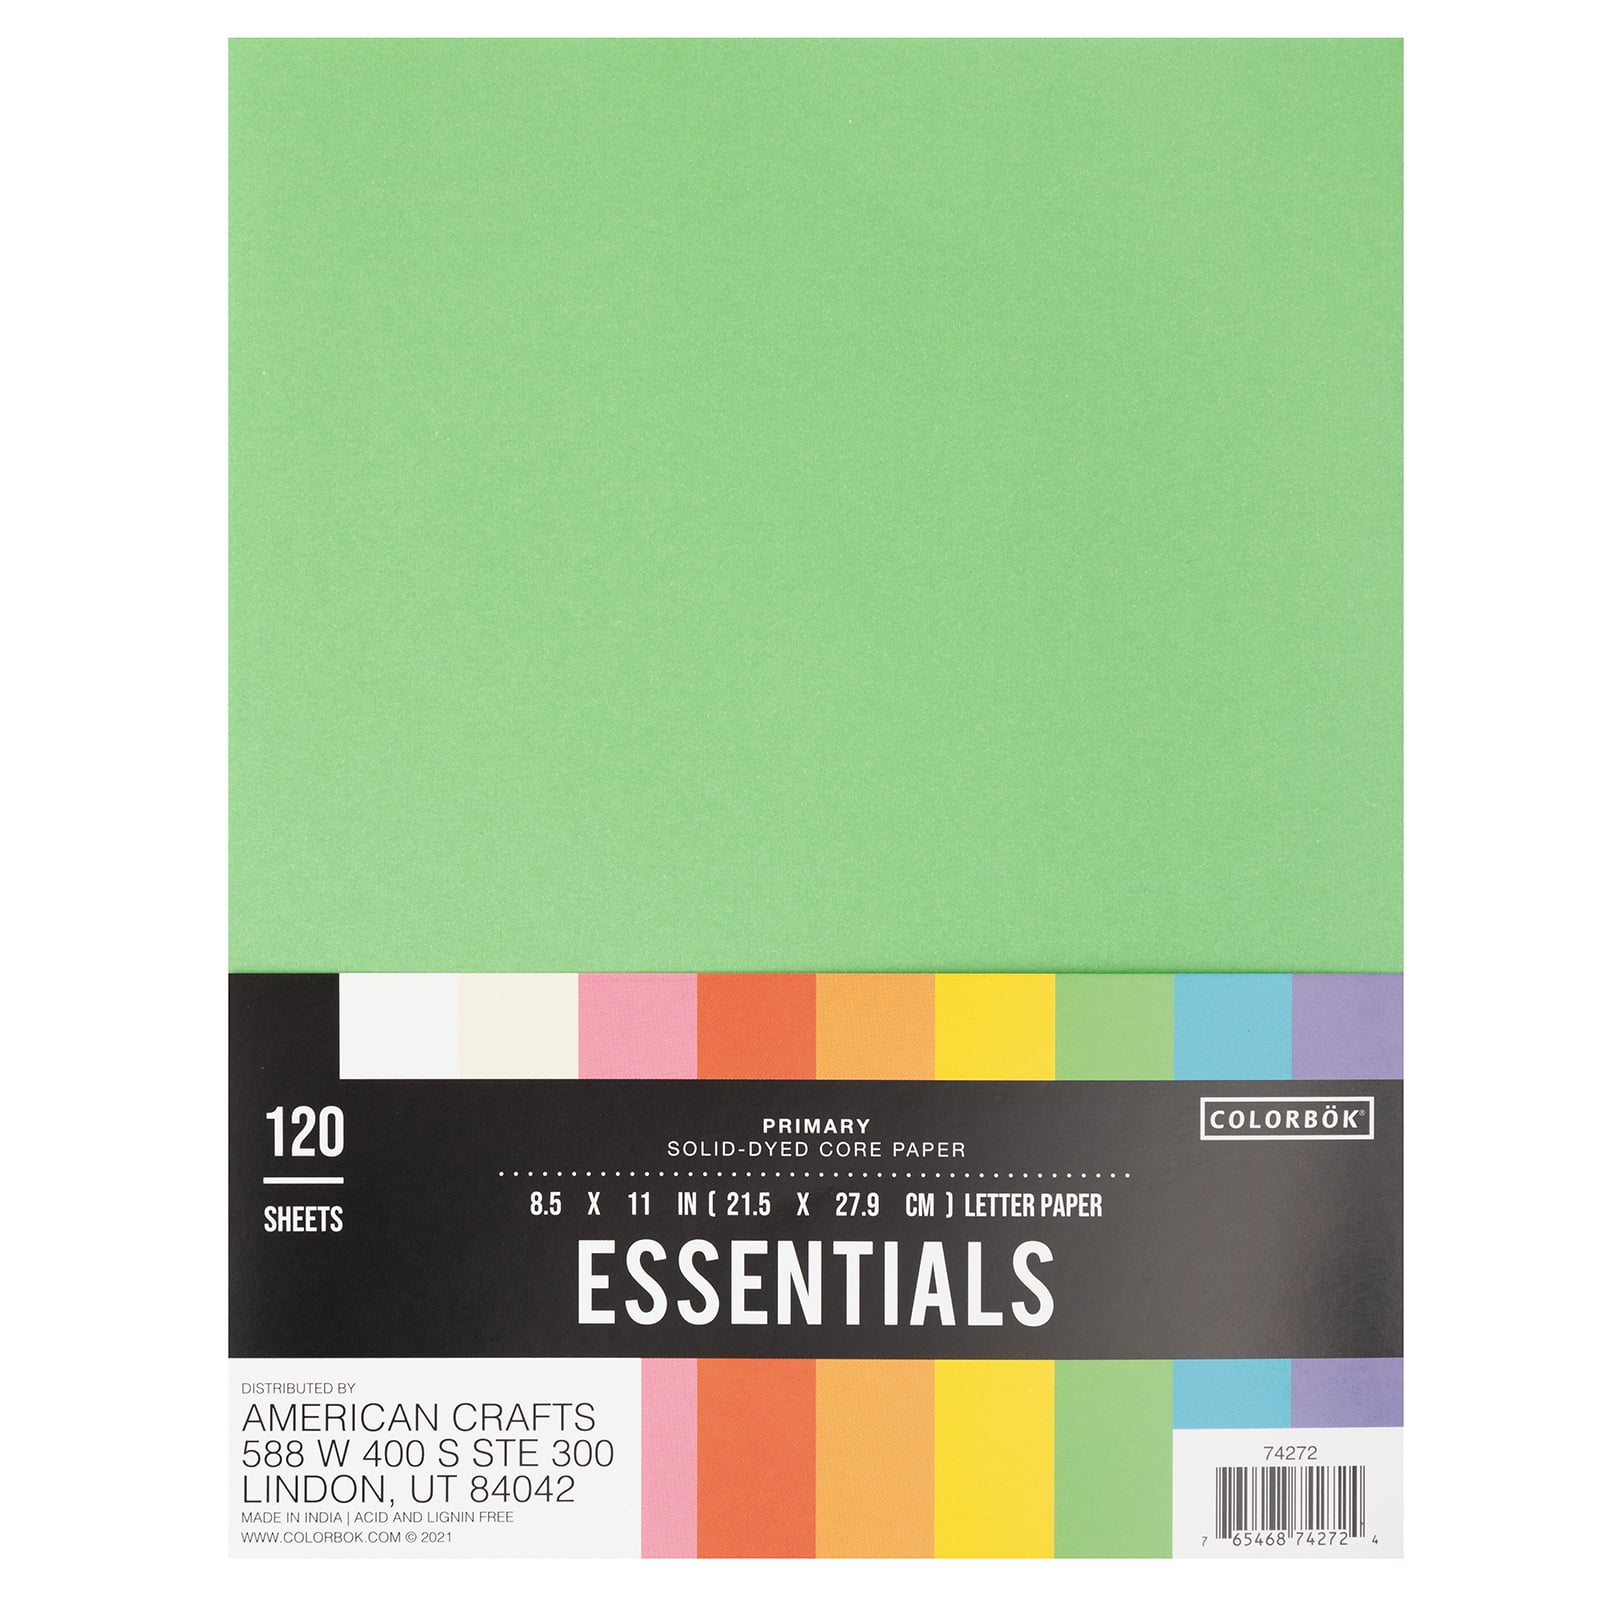 Colorbk Essential Primary Multicolor Paper, 8.5in x 11in, 120 Sheets